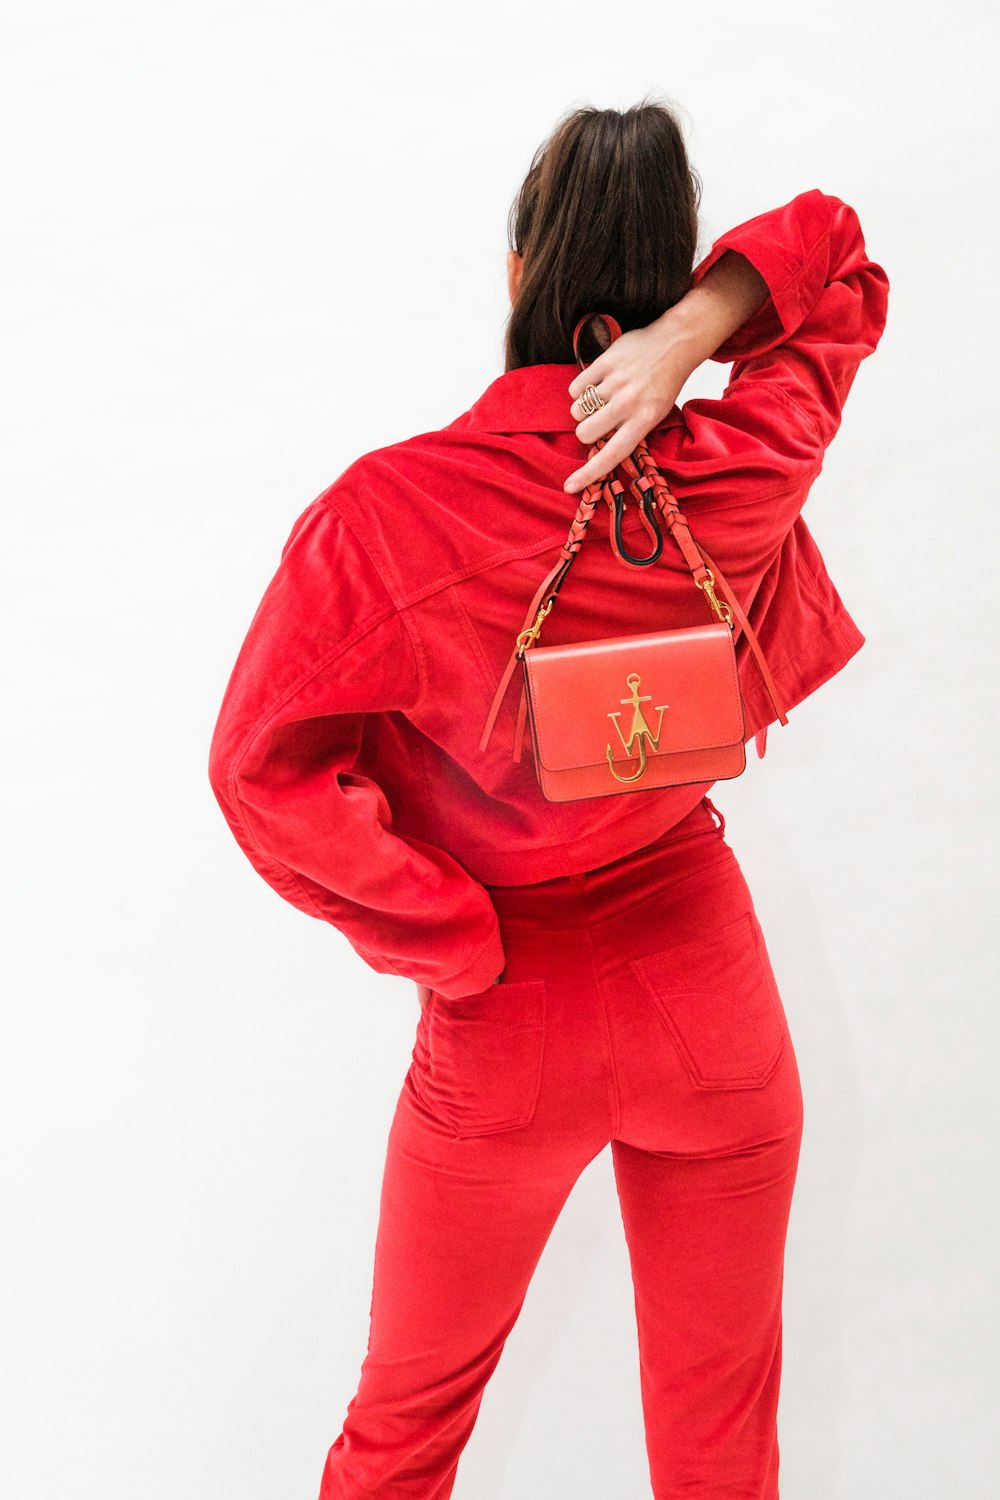 woman in red long sleeve shirt and red pants carrying brown leather handbag